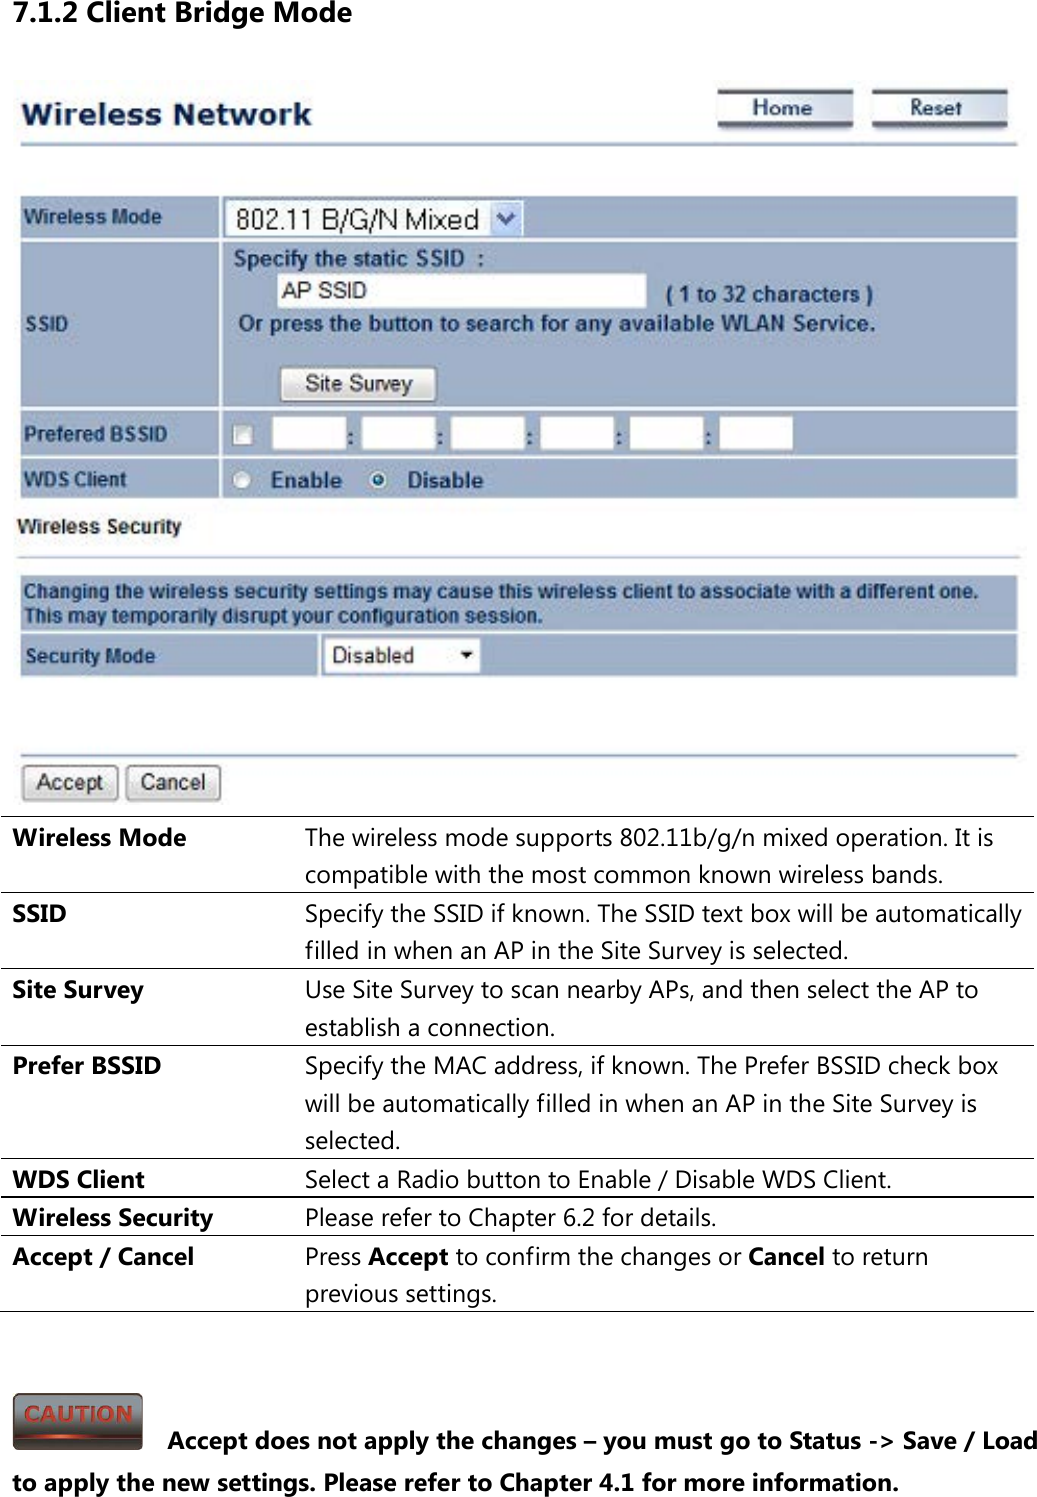 7.1.2 Client Bridge Mode  Wireless Mode The wireless mode supports 802.11b/g/n mixed operation. It is compatible with the most common known wireless bands. SSID  Specify the SSID if known. The SSID text box will be automatically filled in when an AP in the Site Survey is selected. Site Survey Use Site Survey to scan nearby APs, and then select the AP to establish a connection. Prefer BSSID Specify the MAC address, if known. The Prefer BSSID check box will be automatically filled in when an AP in the Site Survey is selected. WDS Client Select a Radio button to Enable / Disable WDS Client. Wireless Security Please refer to Chapter 6.2 for details. Accept / Cancel Press Accept to confirm the changes or Cancel to return previous settings.     Accept does not apply the changes – you must go to Status -&gt; Save / Load to apply the new settings. Please refer to Chapter 4.1 for more information. 